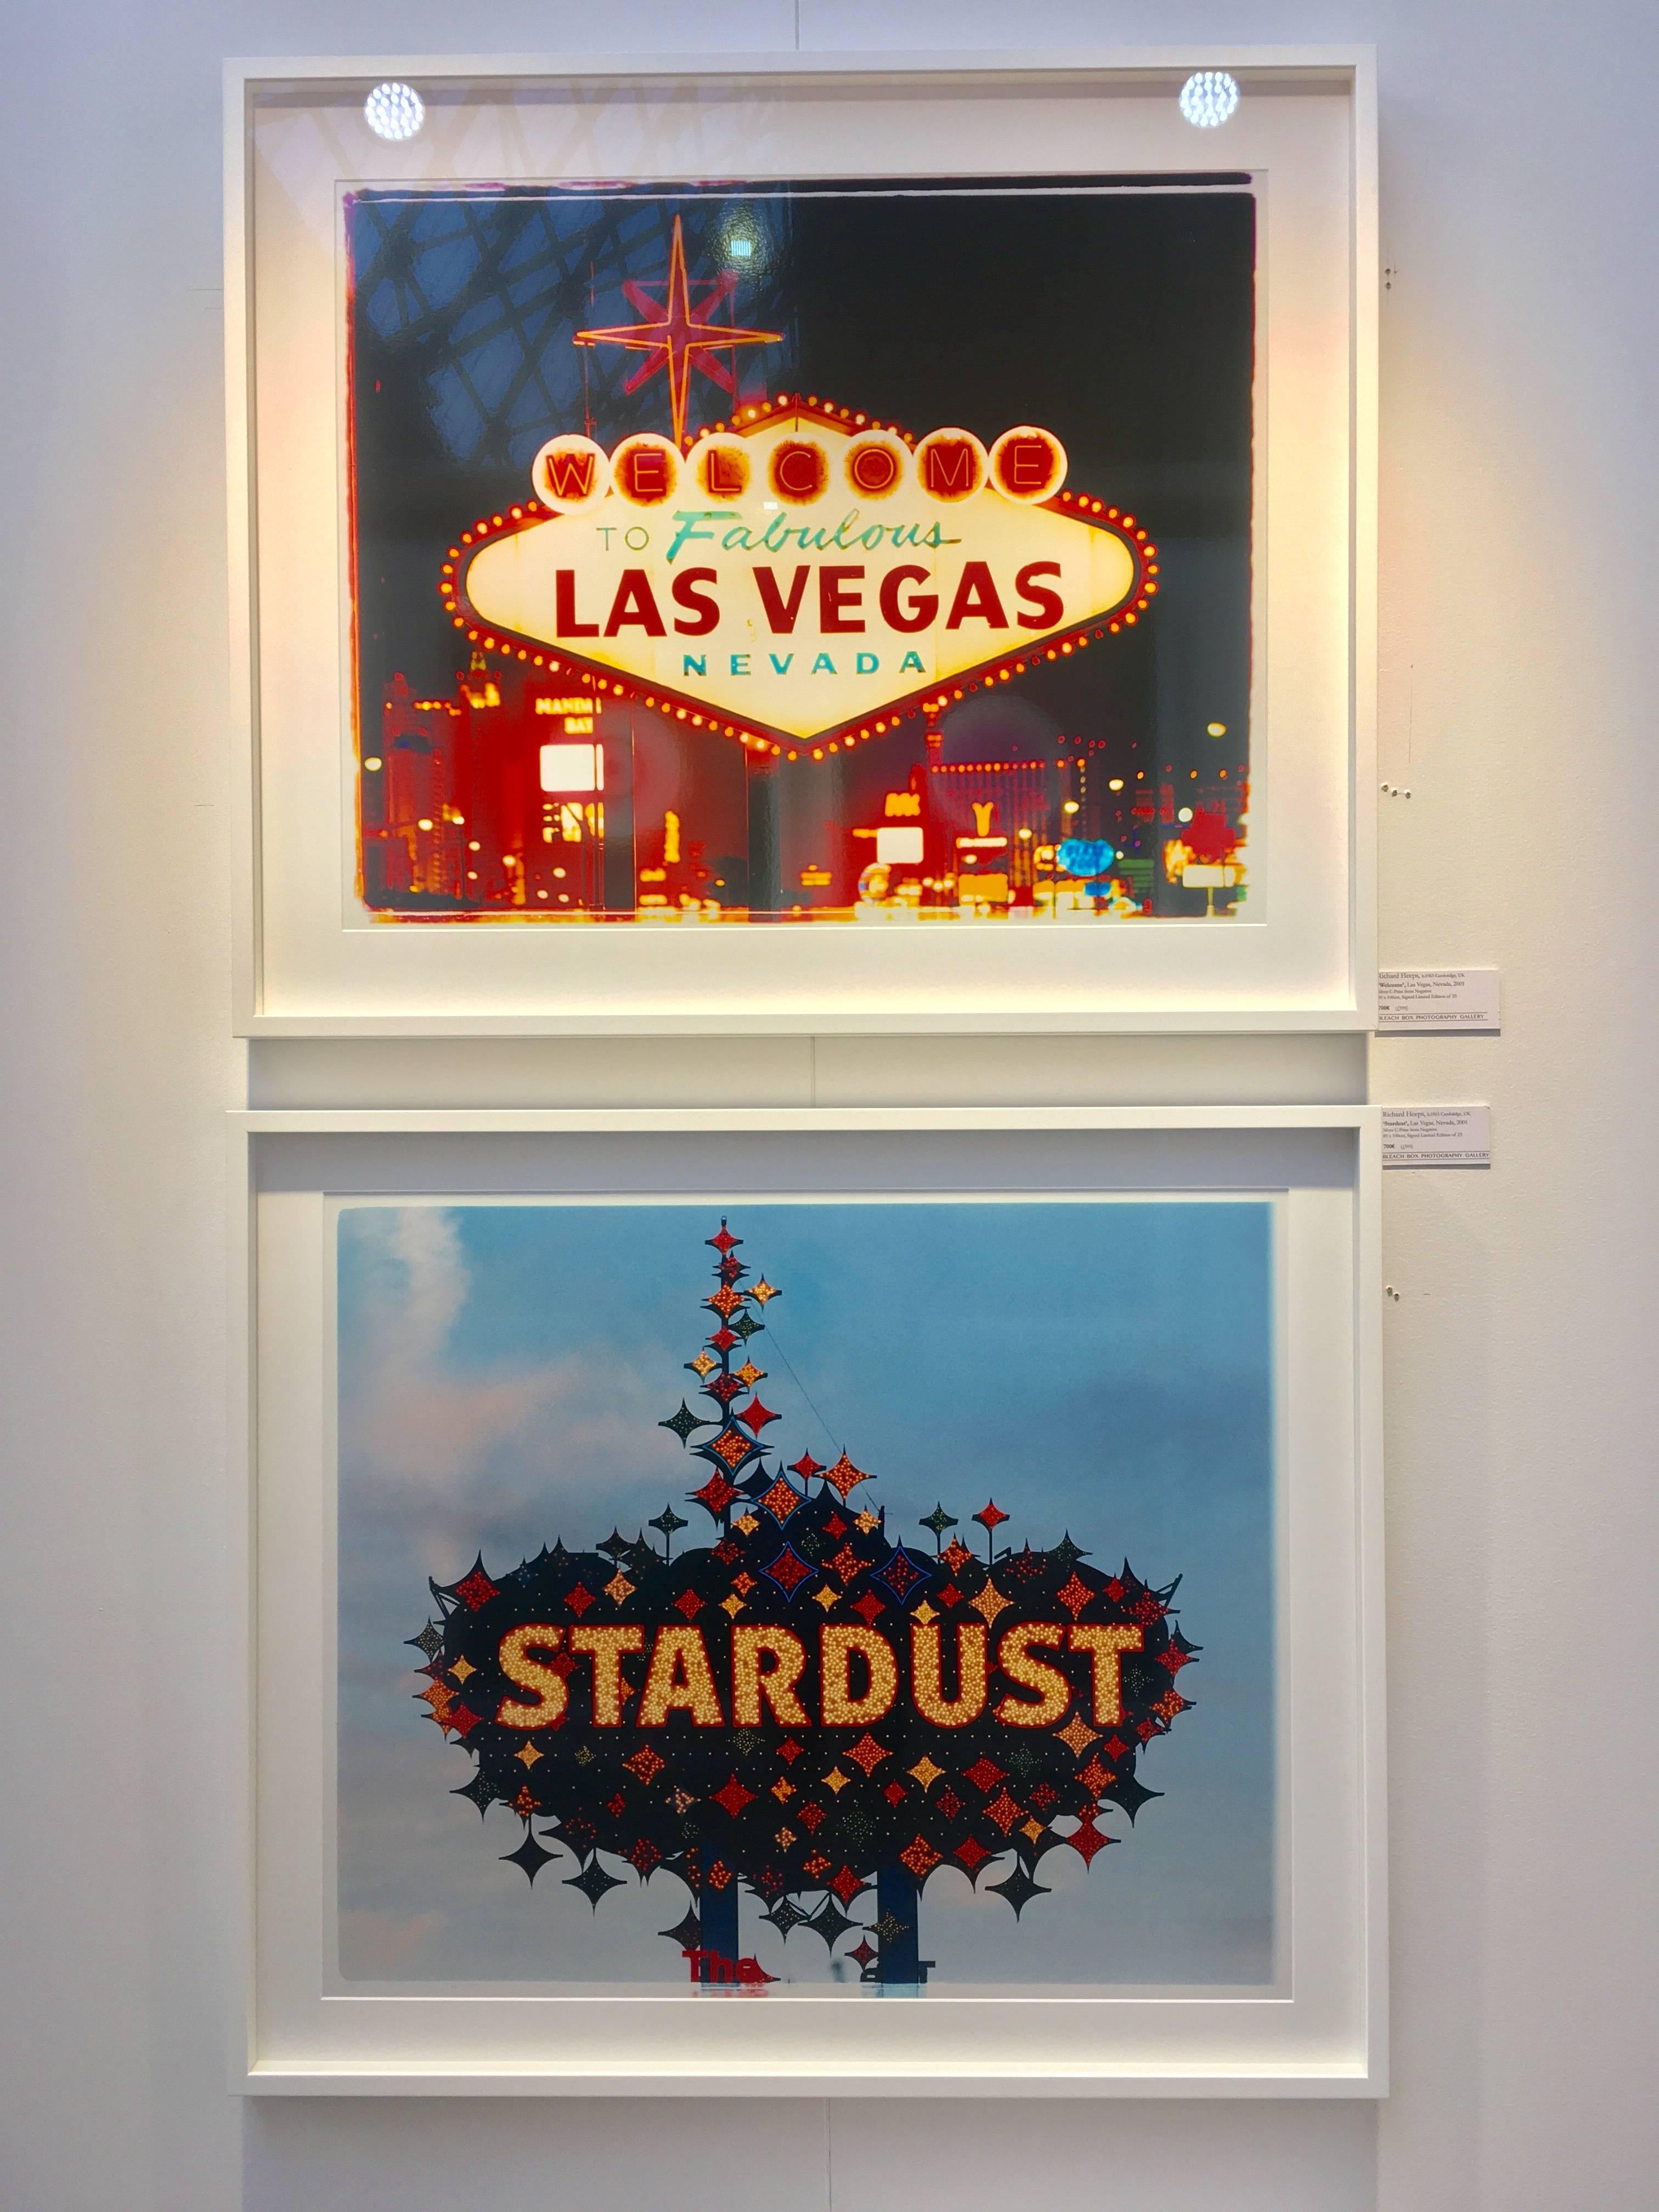 Stardust, photograph from Richard Heeps Dream in Colour Series.
This cool picture has a classic Americana feel. Richard Heeps pictures beautifully capture parts of Las Vegas which are no longer there. This iconic googie 'Stardust' sign presented